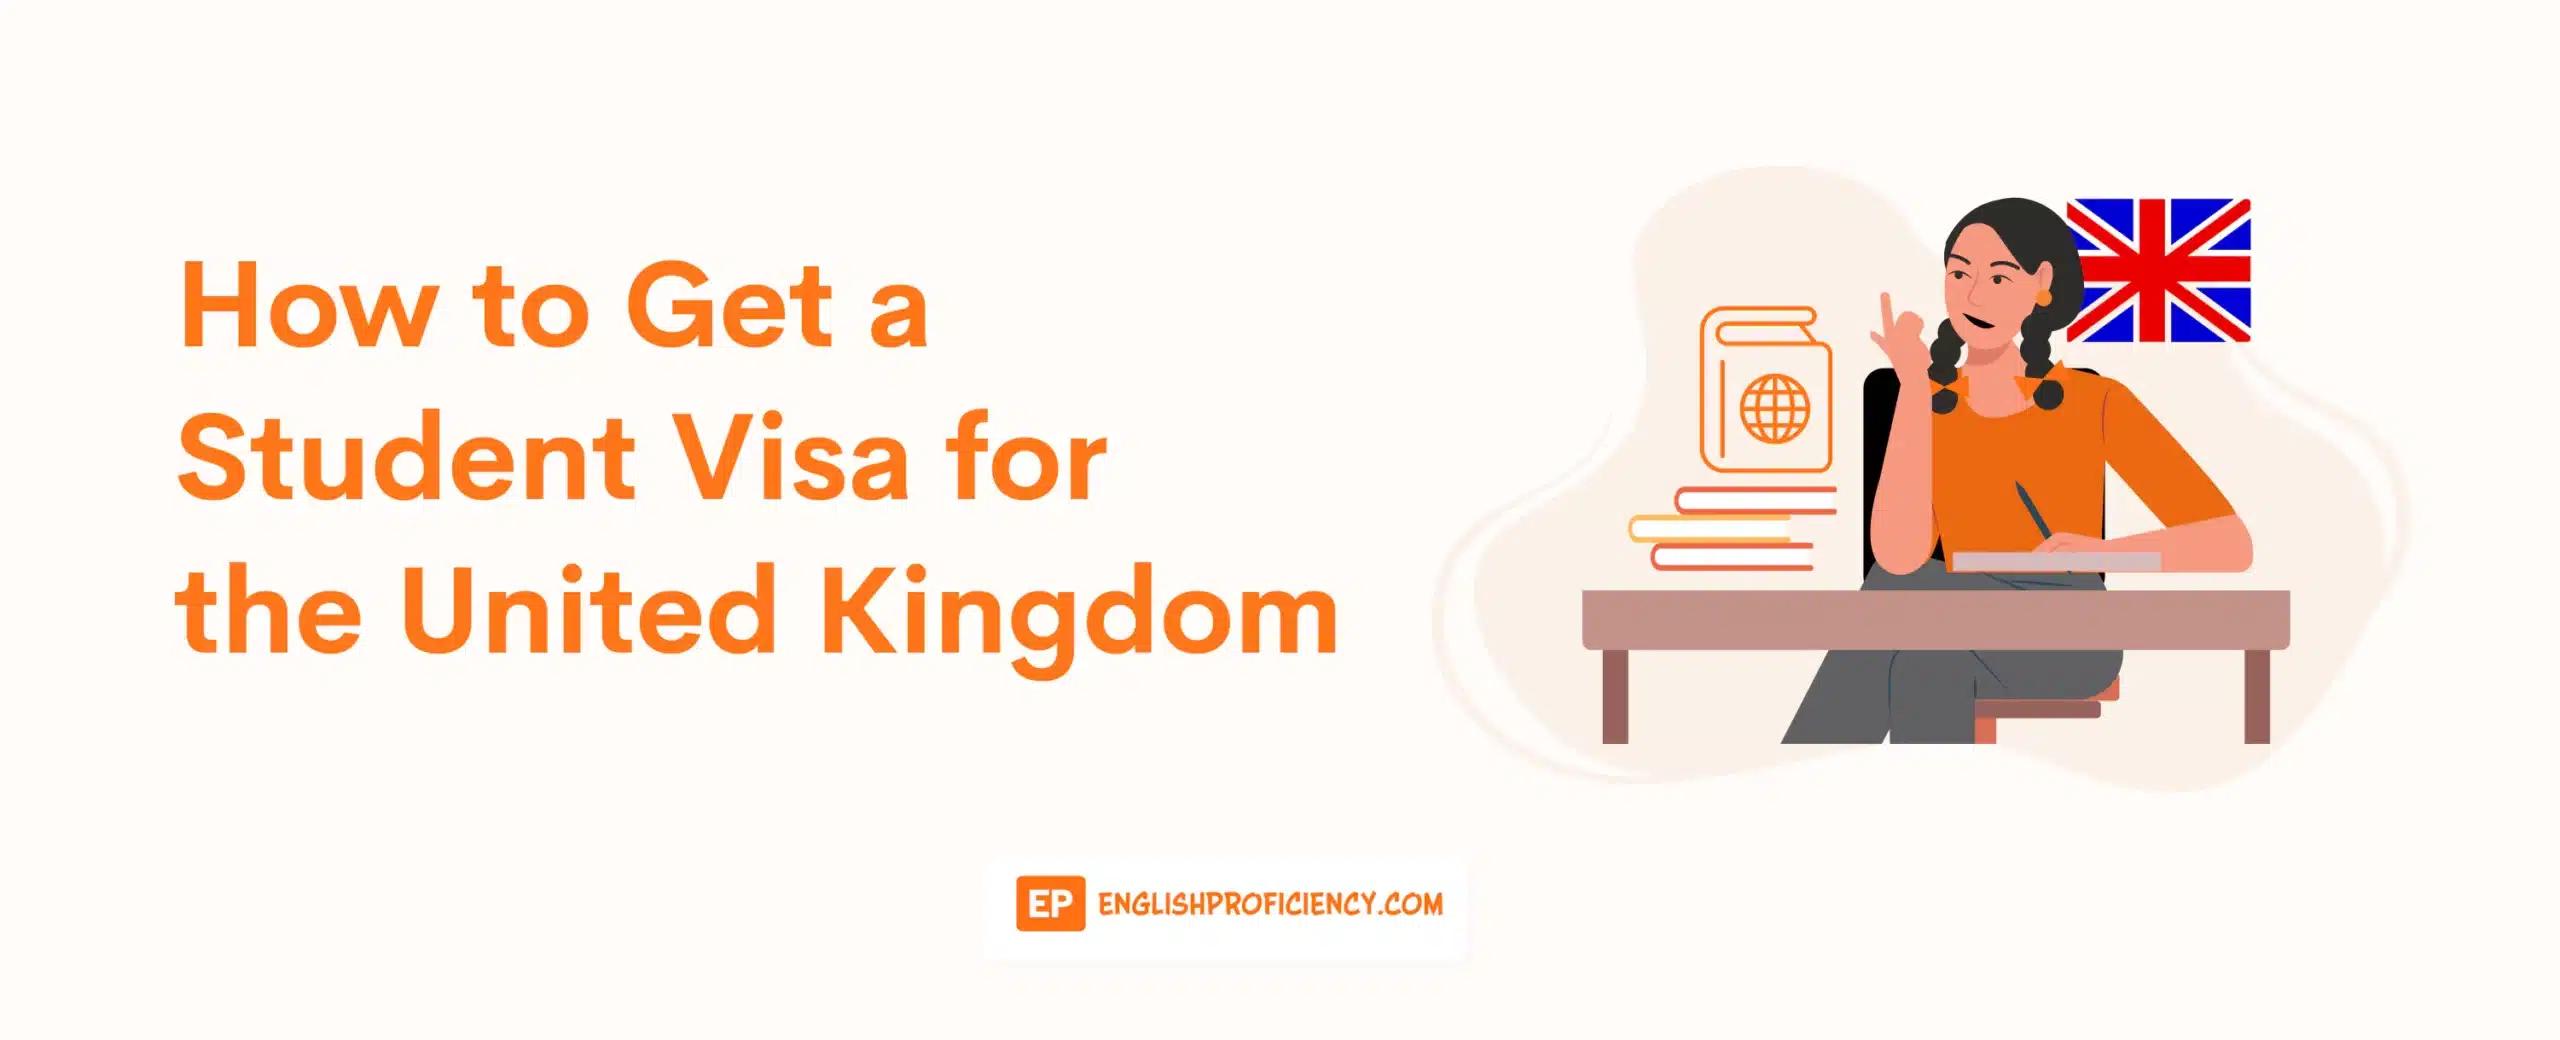 How to Get a Student Visa for the United Kingdom